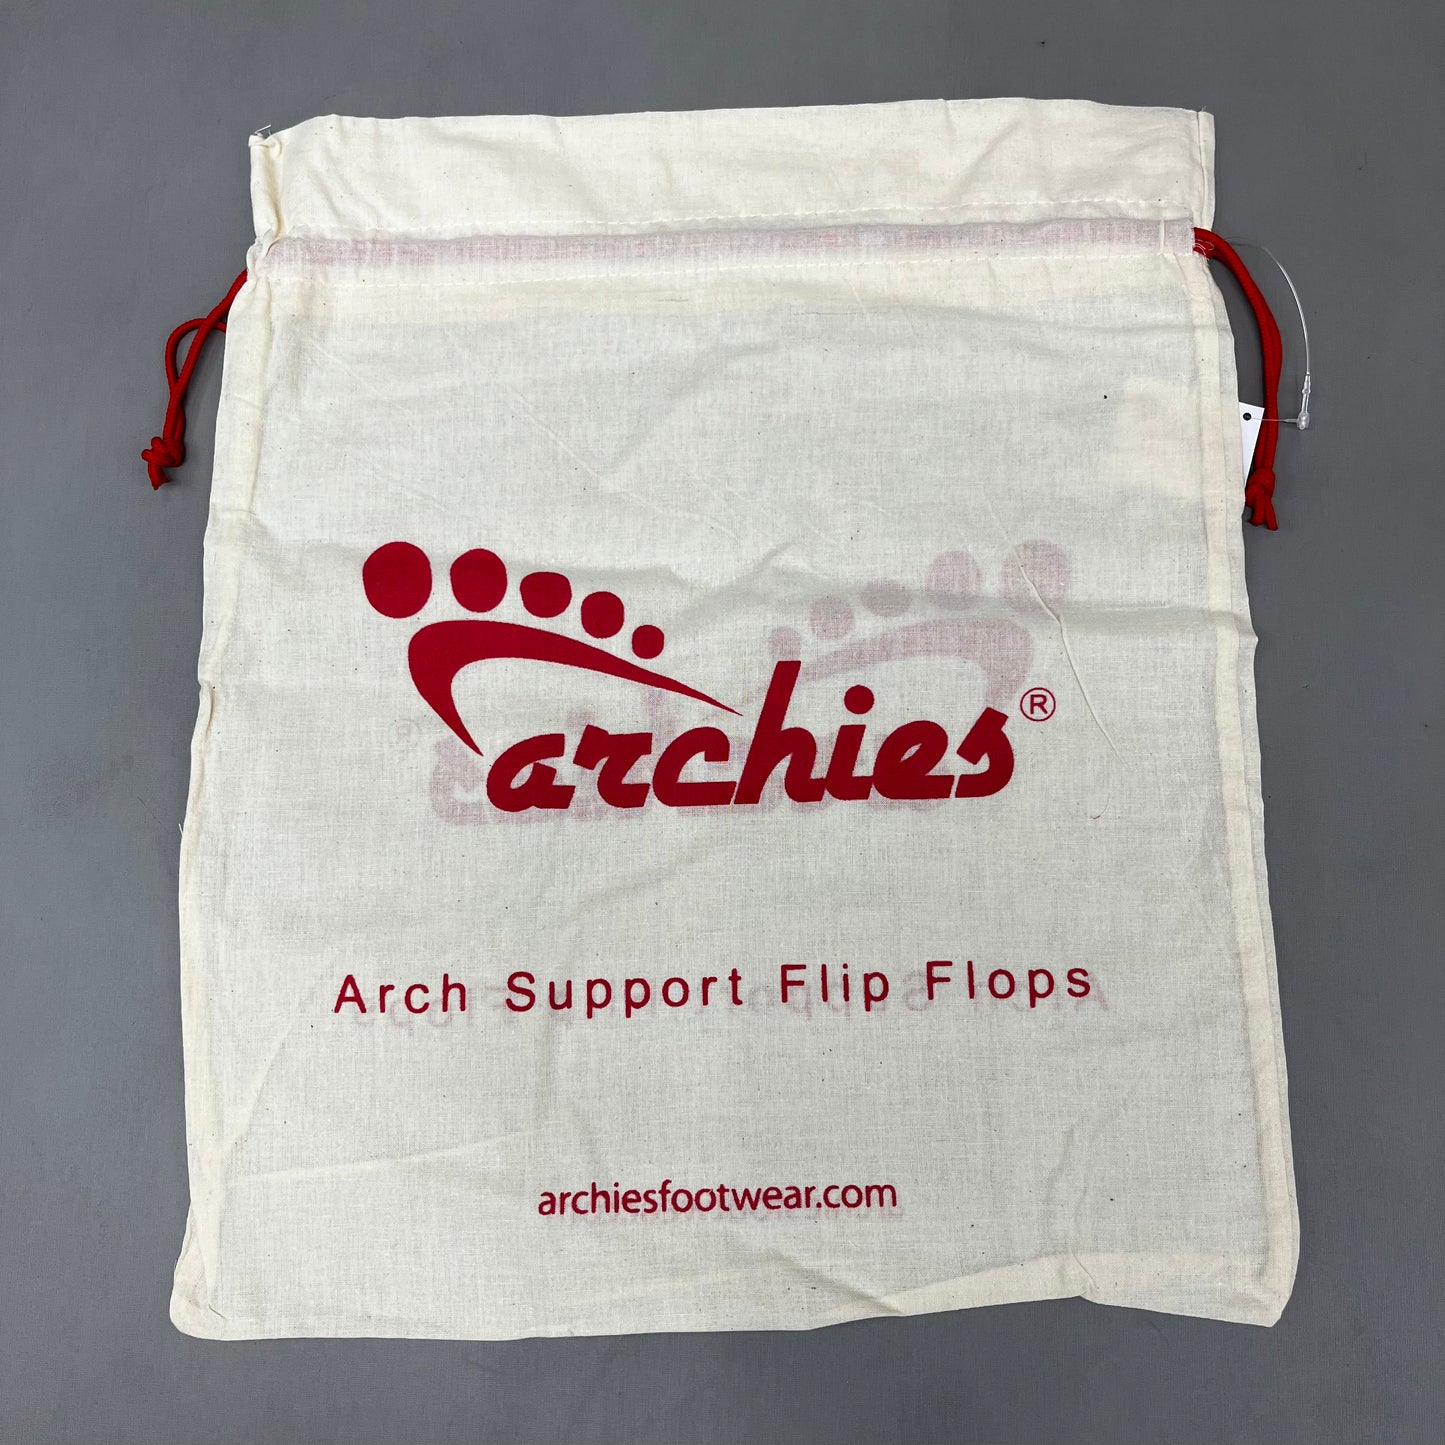 ARCHIES 4-PACK! Cotton Carry Bags for Footwear Flip Flop Sandals 17"x14" Tan (New)